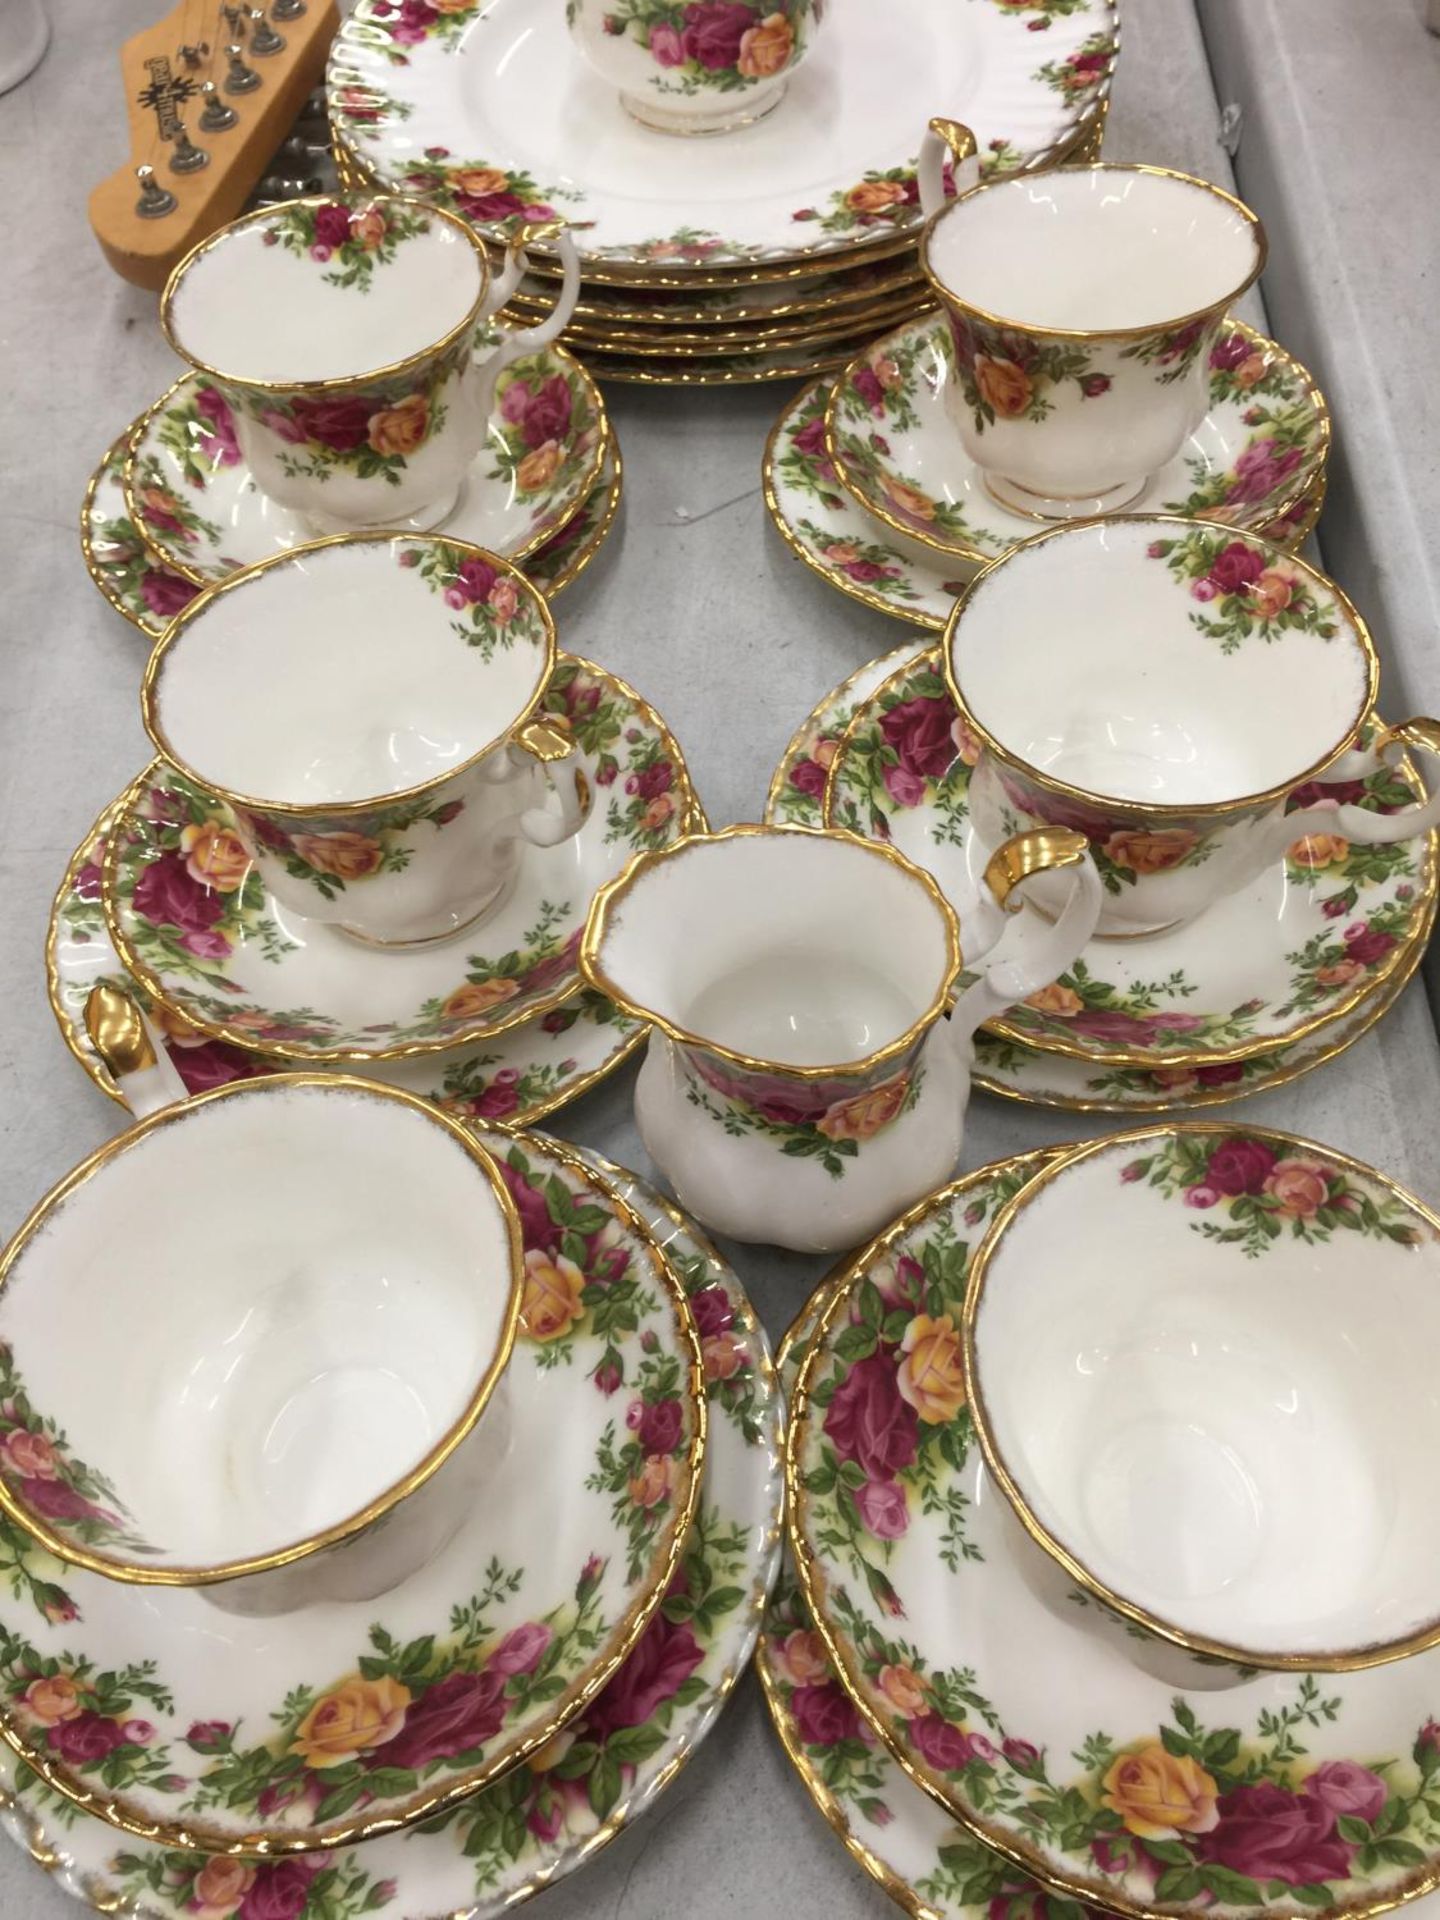 A ROYAL ALBERT 'OLD COUNTRY ROSES' TEASET TO INCLUDE DINNER PLATES, CUPS, SAUCERS, SIDE PLATES A - Image 8 of 8